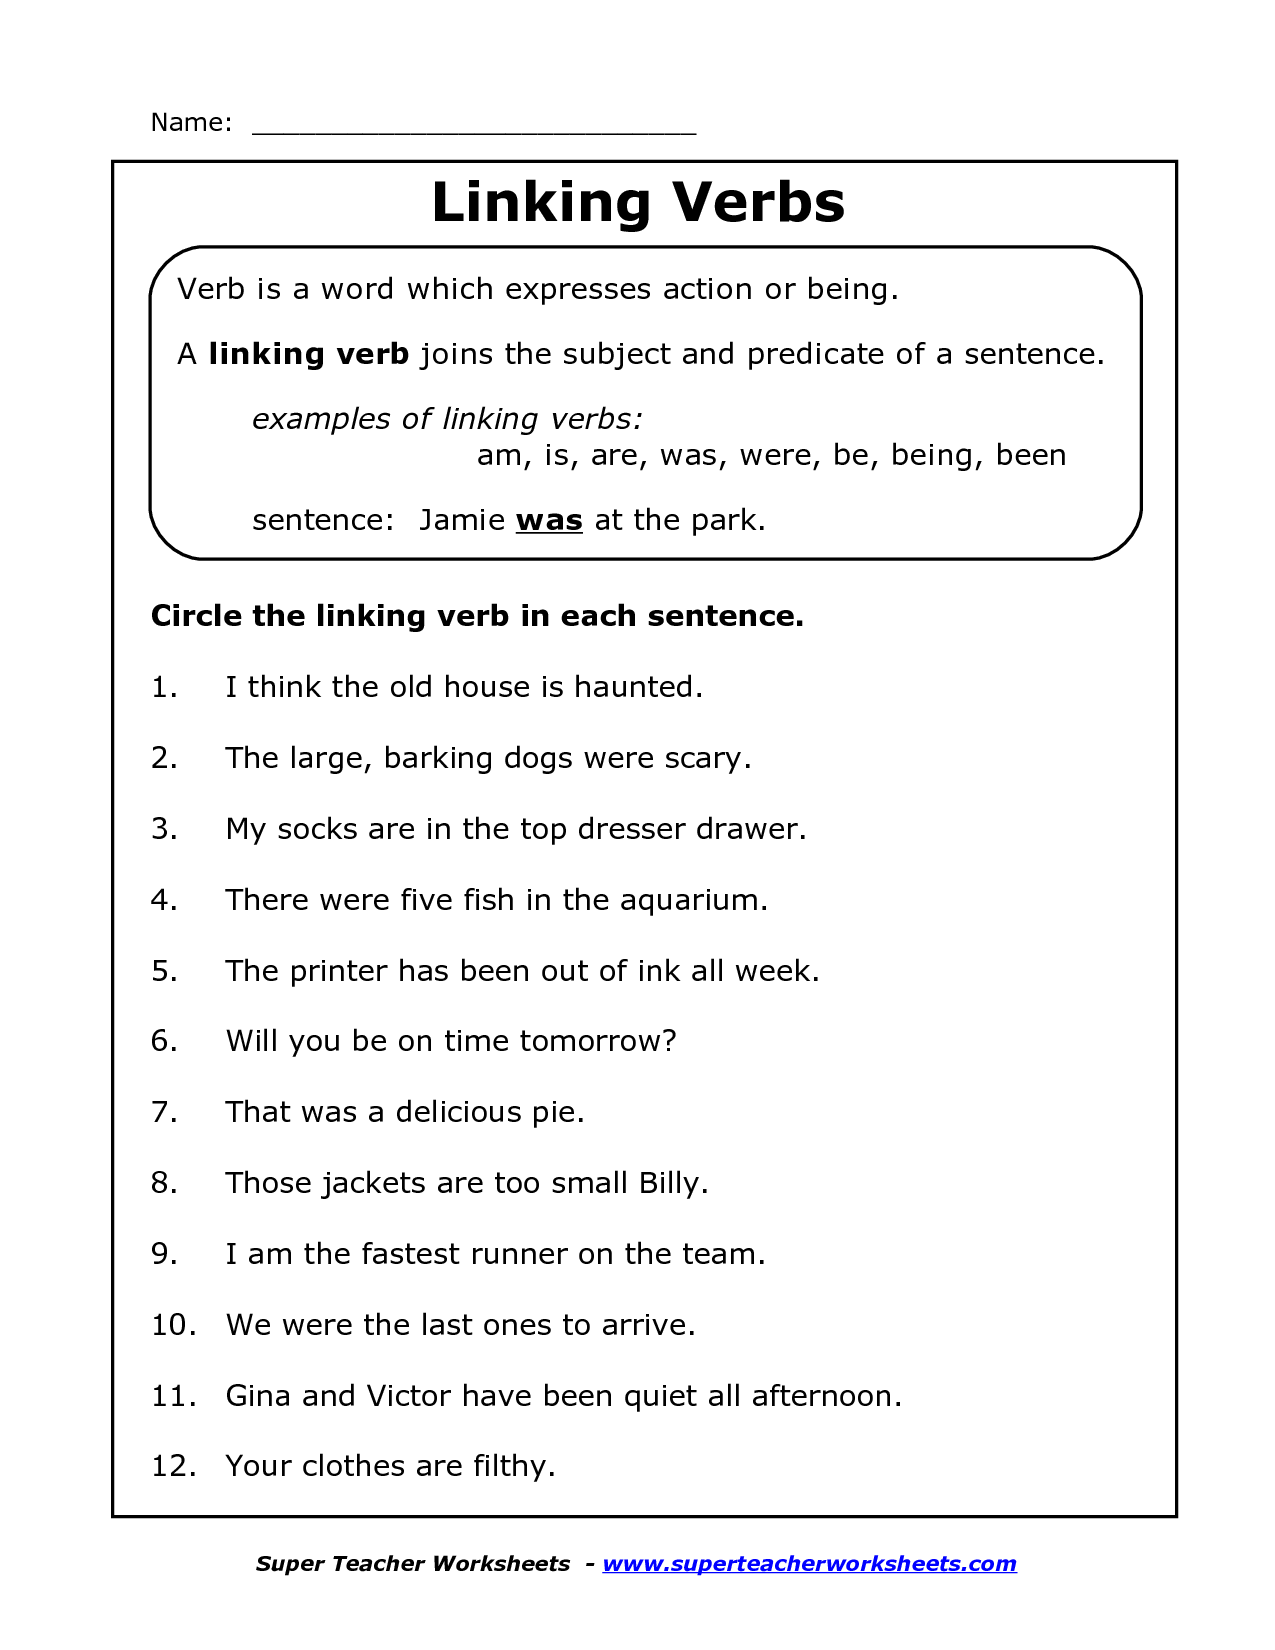 other-worksheet-category-page-101-worksheeto